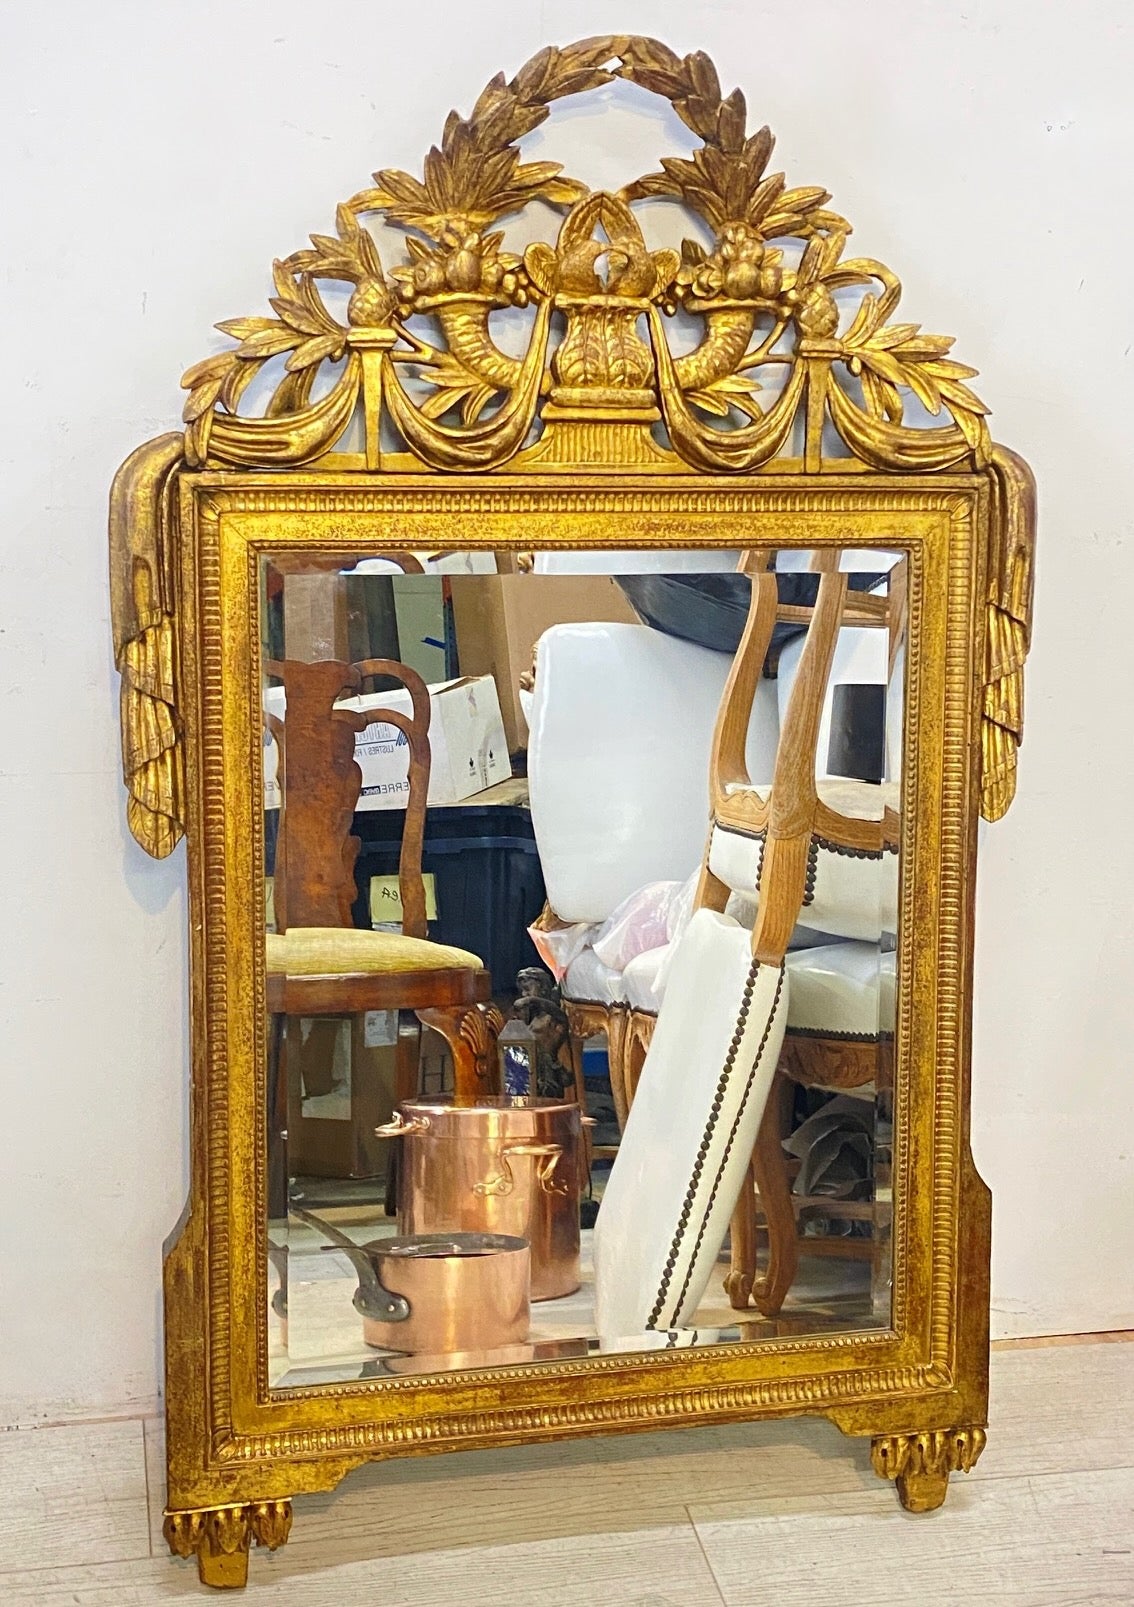 A fine early 18th century French carved and gilt wood framed mirror. The top paired with birds, horns of plenty, and draped foliate sprays.
A superb example of this period style mirror, and having its original back.
The mirror looks to have been